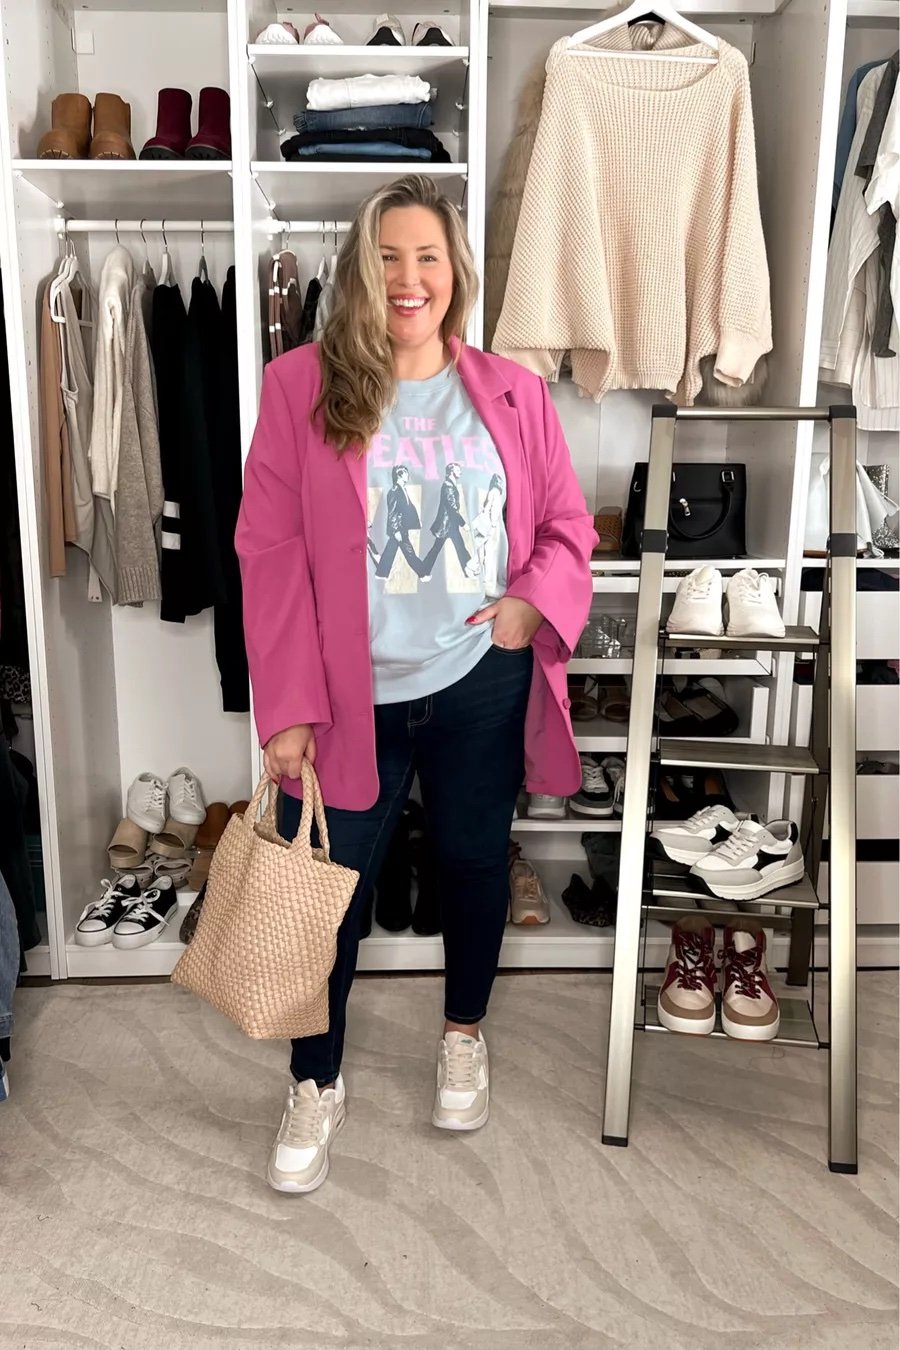 5 DAYS OF PLUS SIZE CASUAL OUTFITS — House of Dorough